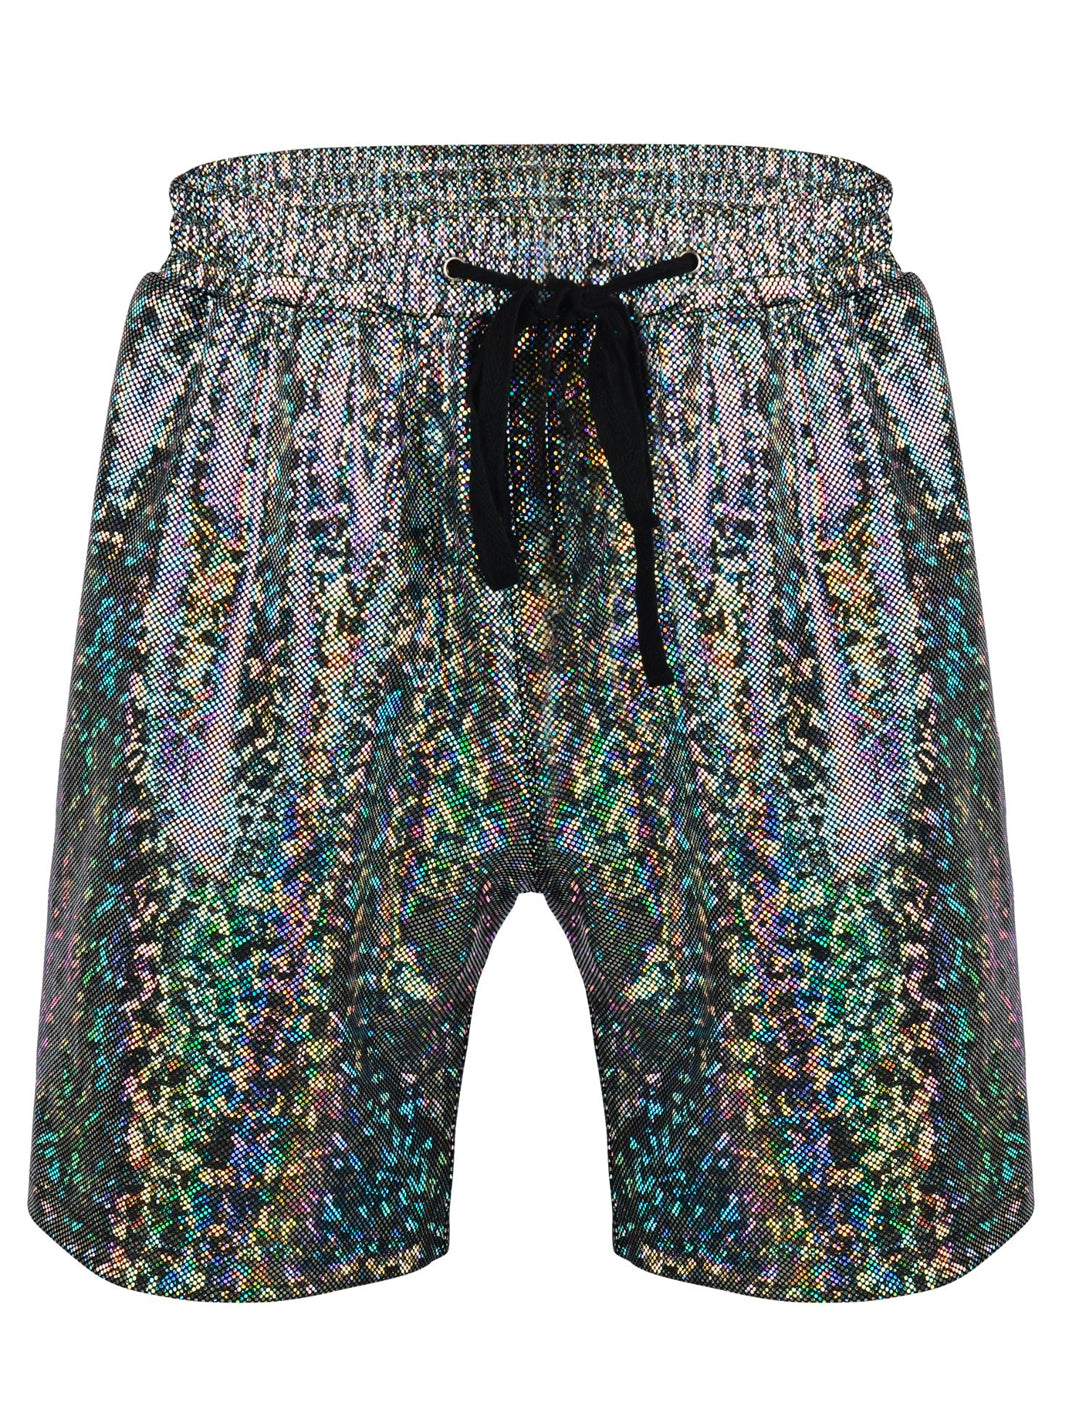 ULTIMATE HOLOGRAPHIC MENS SHORTS - SILVER